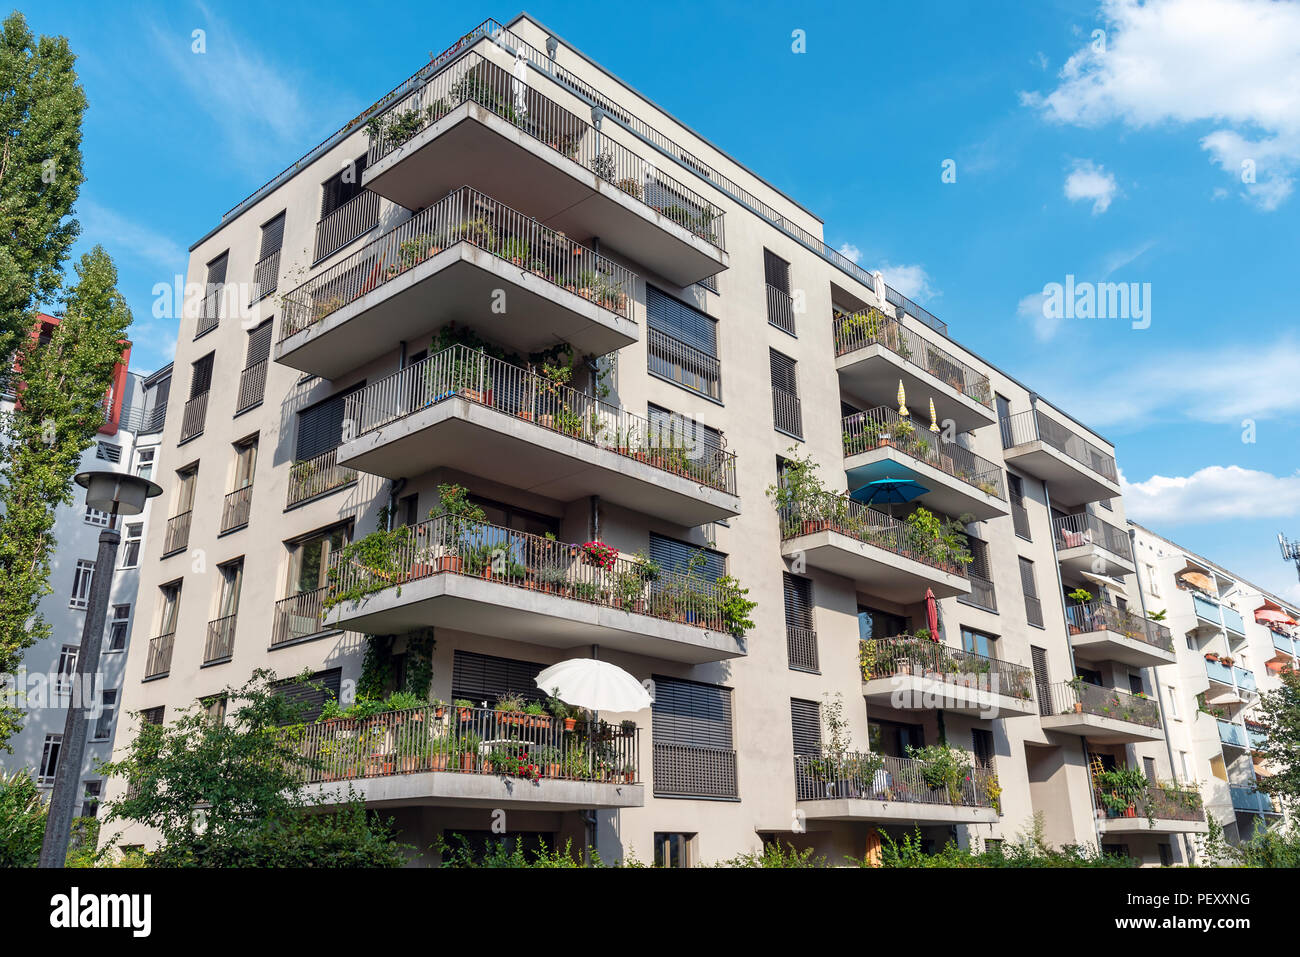 Modern grey apartment building with big balconies seen in Berlin, Germany Stock Photo